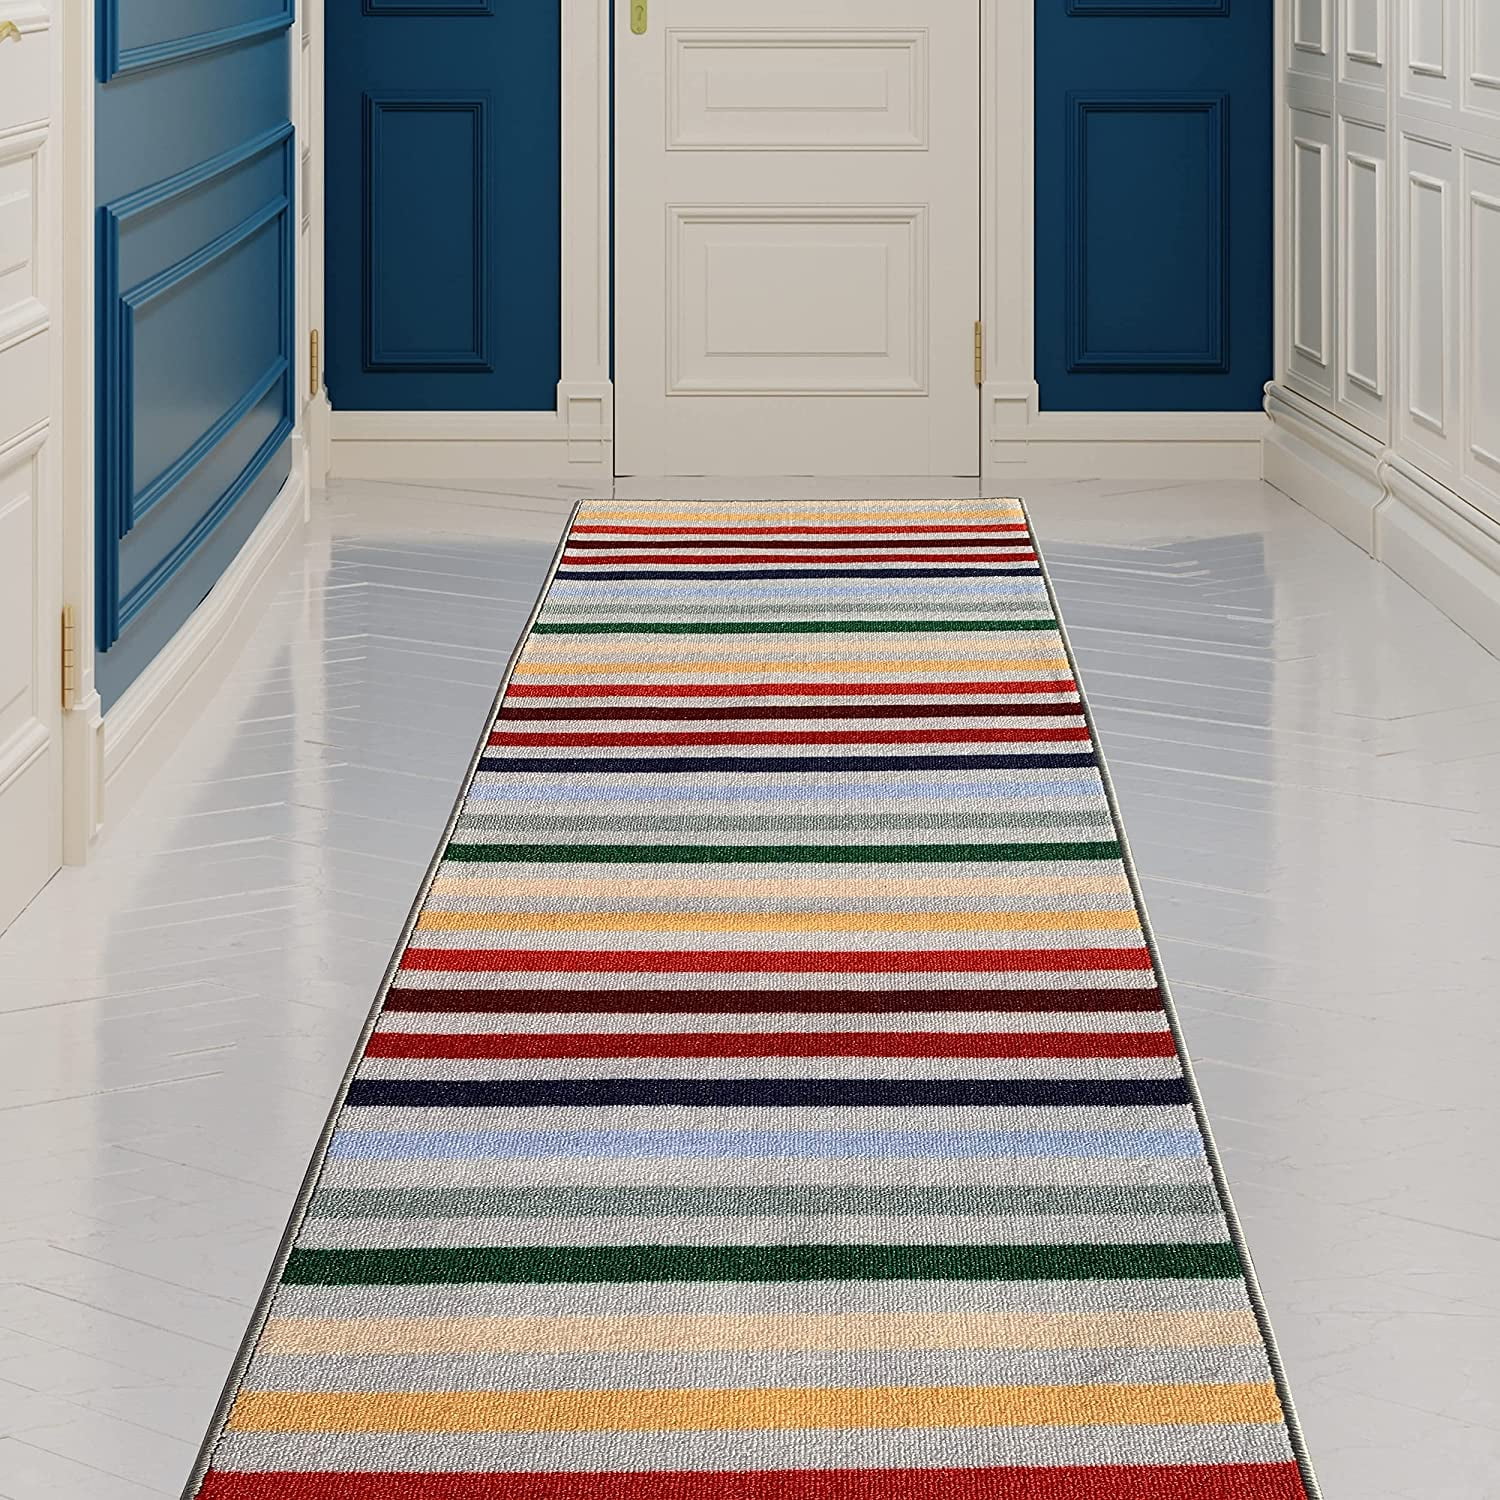 HALLWAY OR STAIR RUNNER RUG CARPET 26 INCHES WIDE 